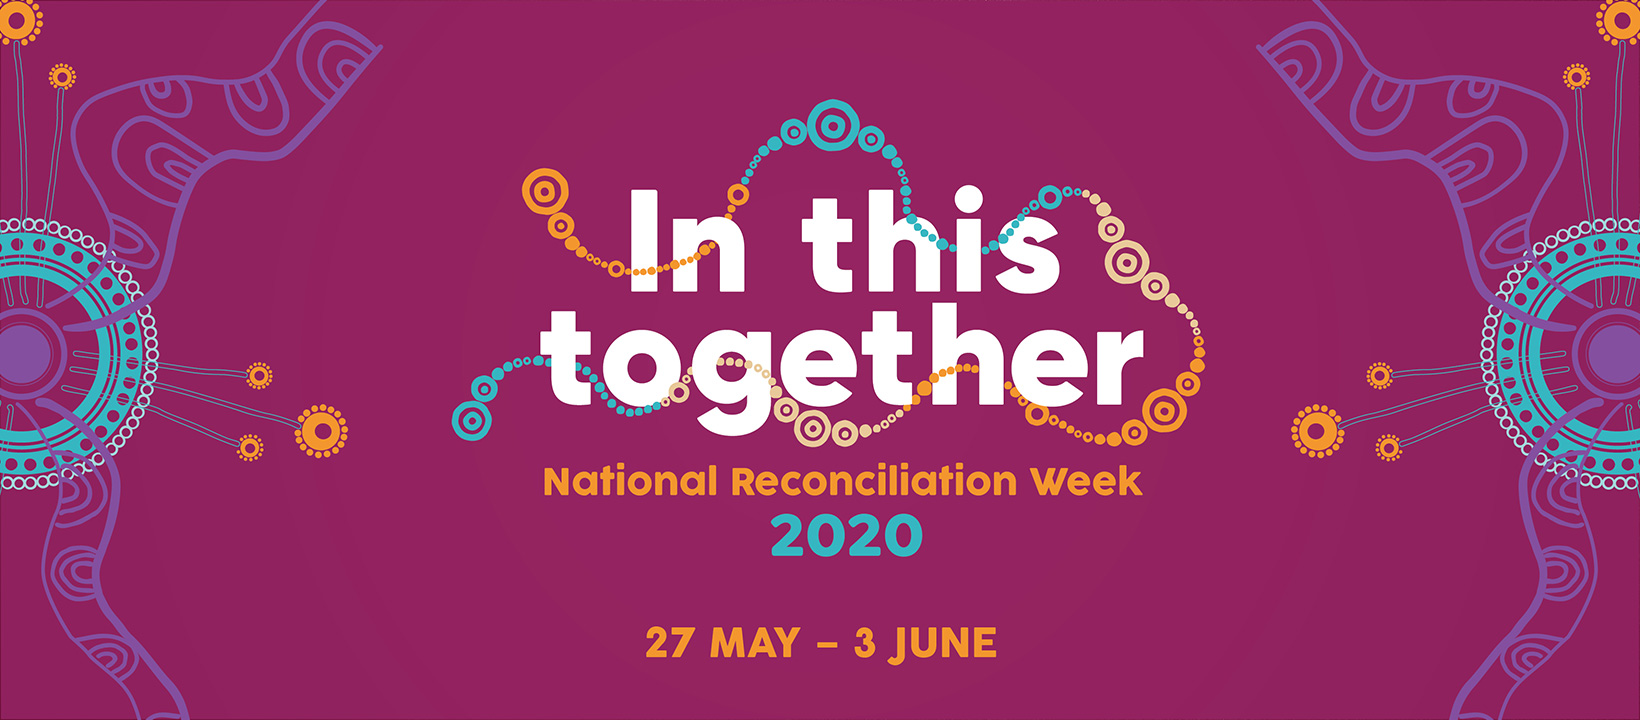 National Reconciliation Week 2020 banner